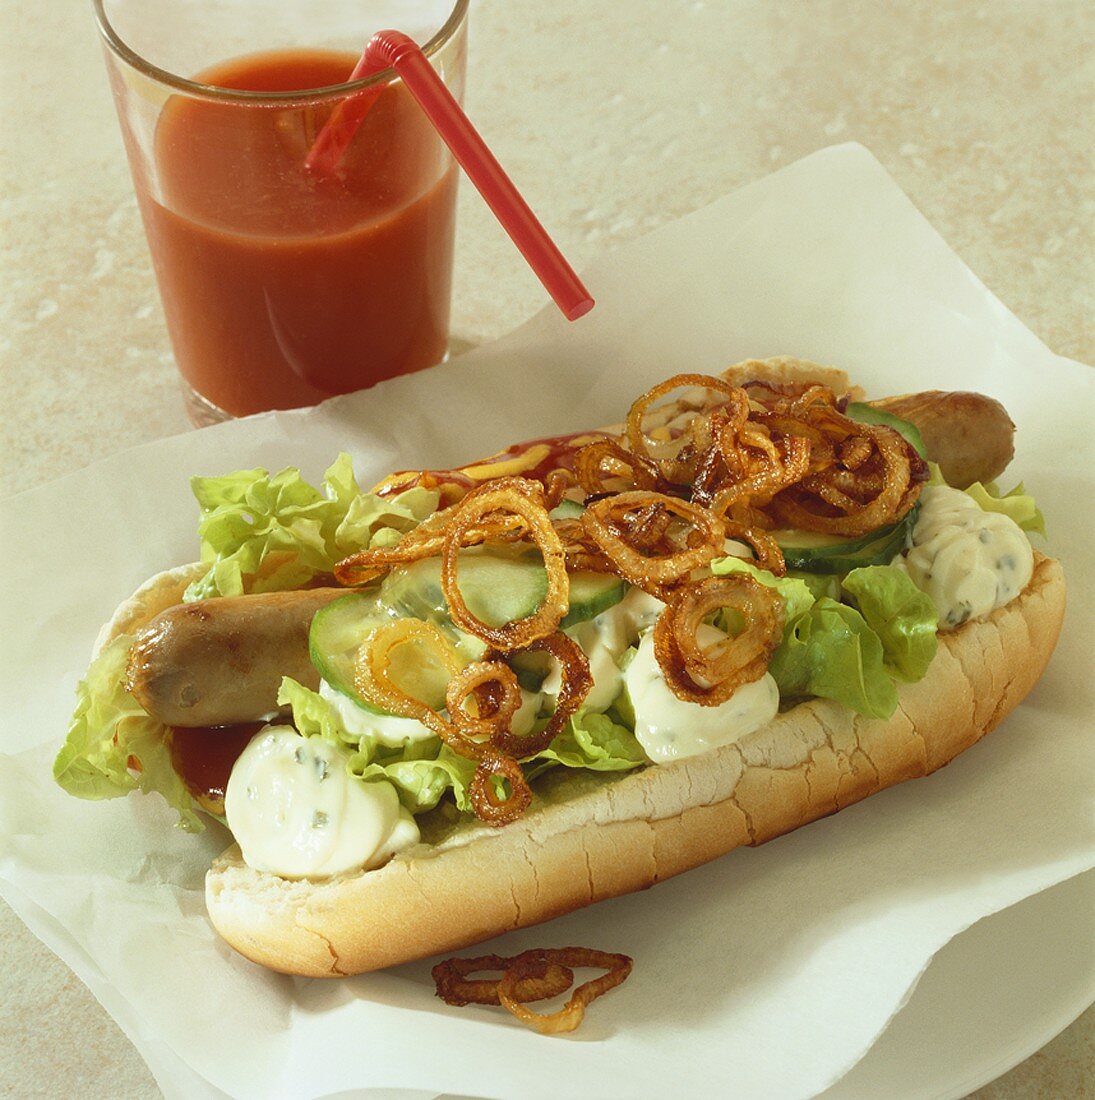 Hot dog with salad, cucumber, remoulade and onions